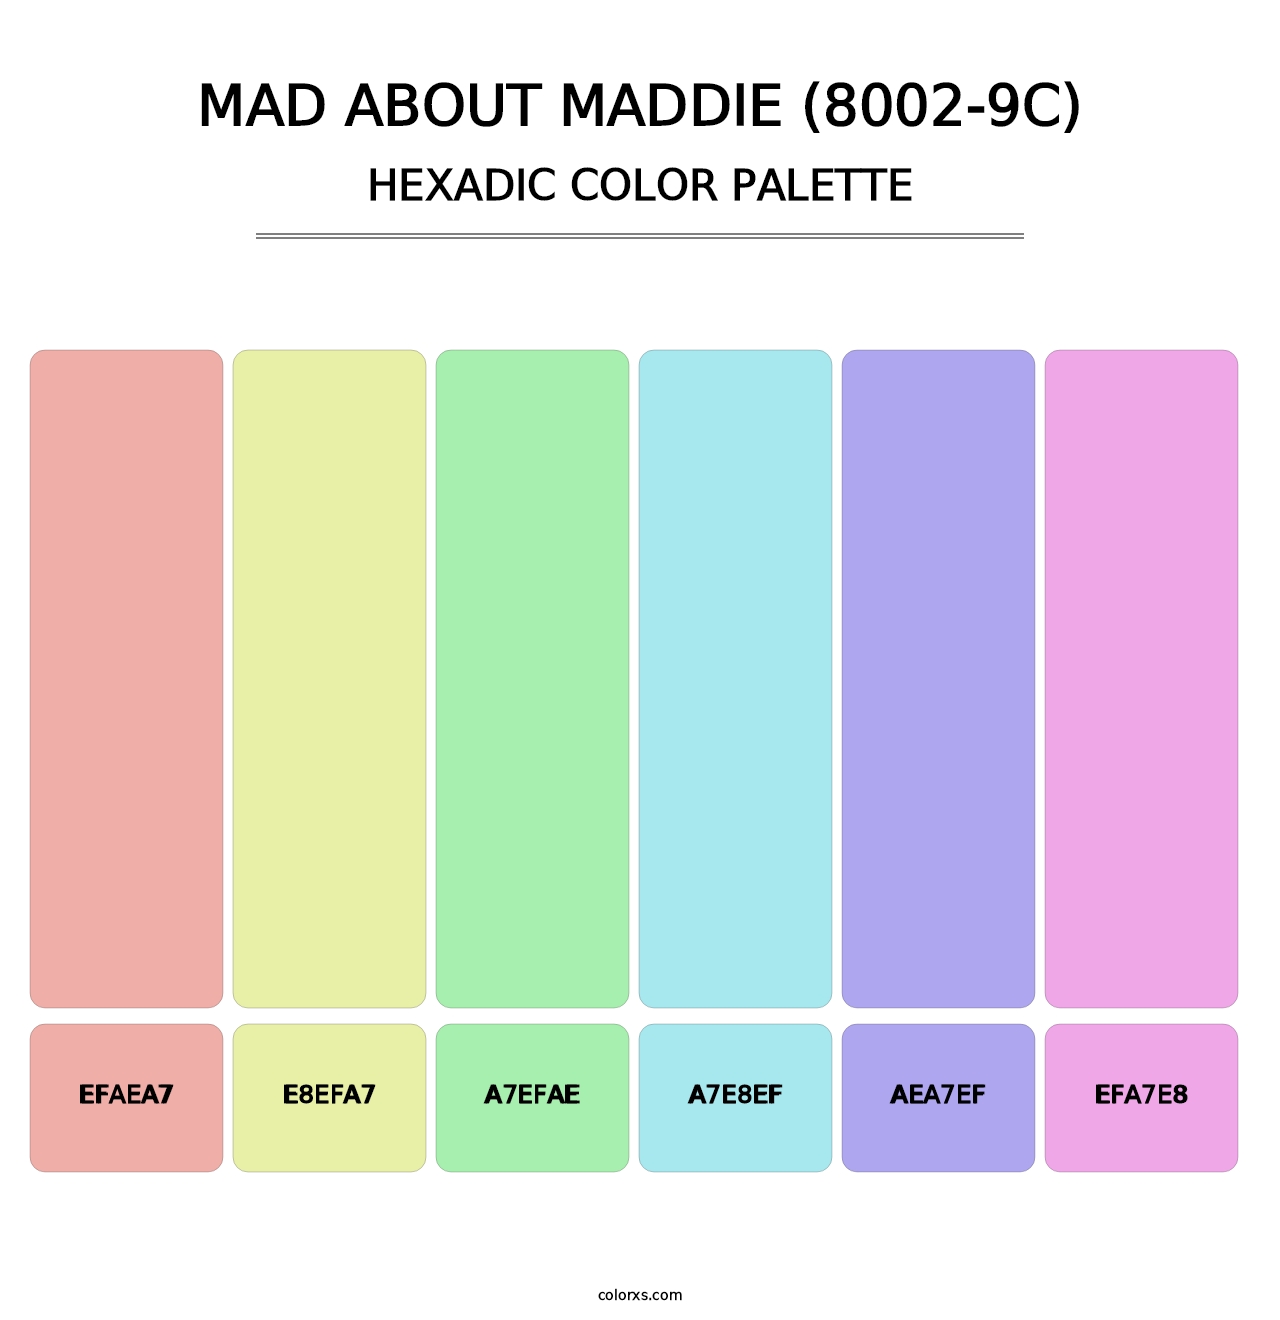 Mad About Maddie (8002-9C) - Hexadic Color Palette